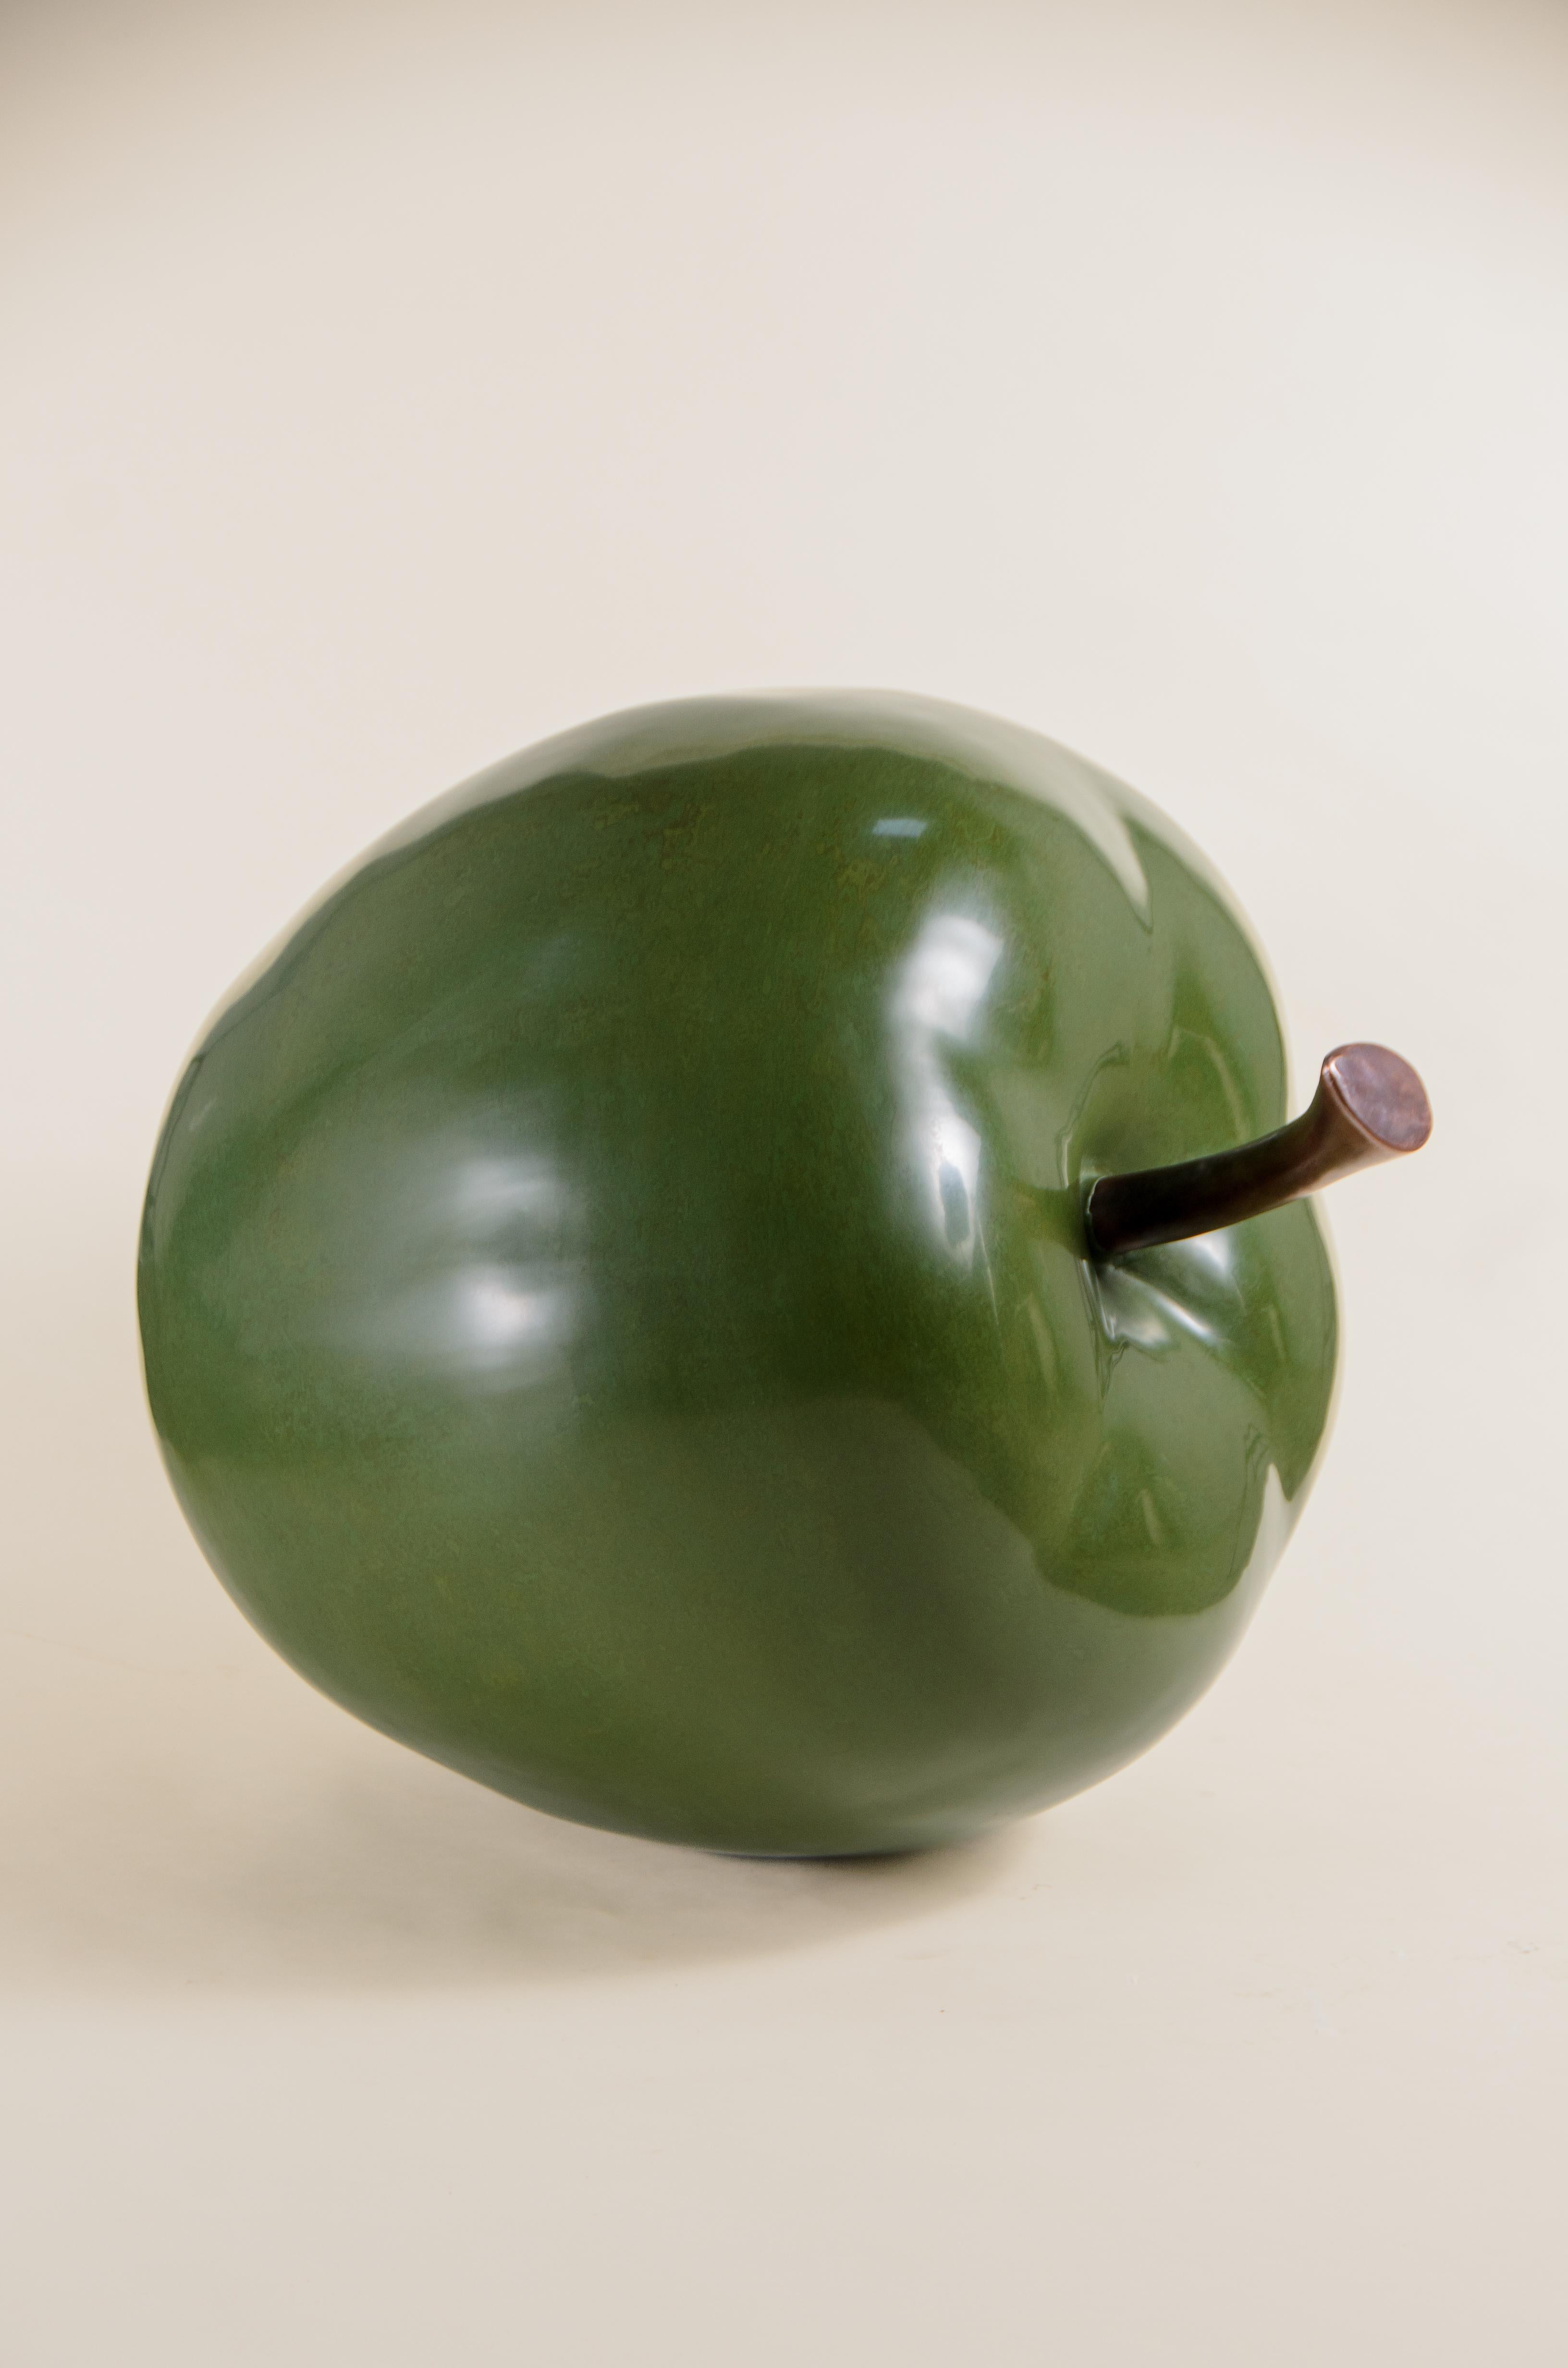 Contemporary Green Apple Lacquer Sculpture w/ Copper Stem by Robert Kuo, Limited Edition For Sale